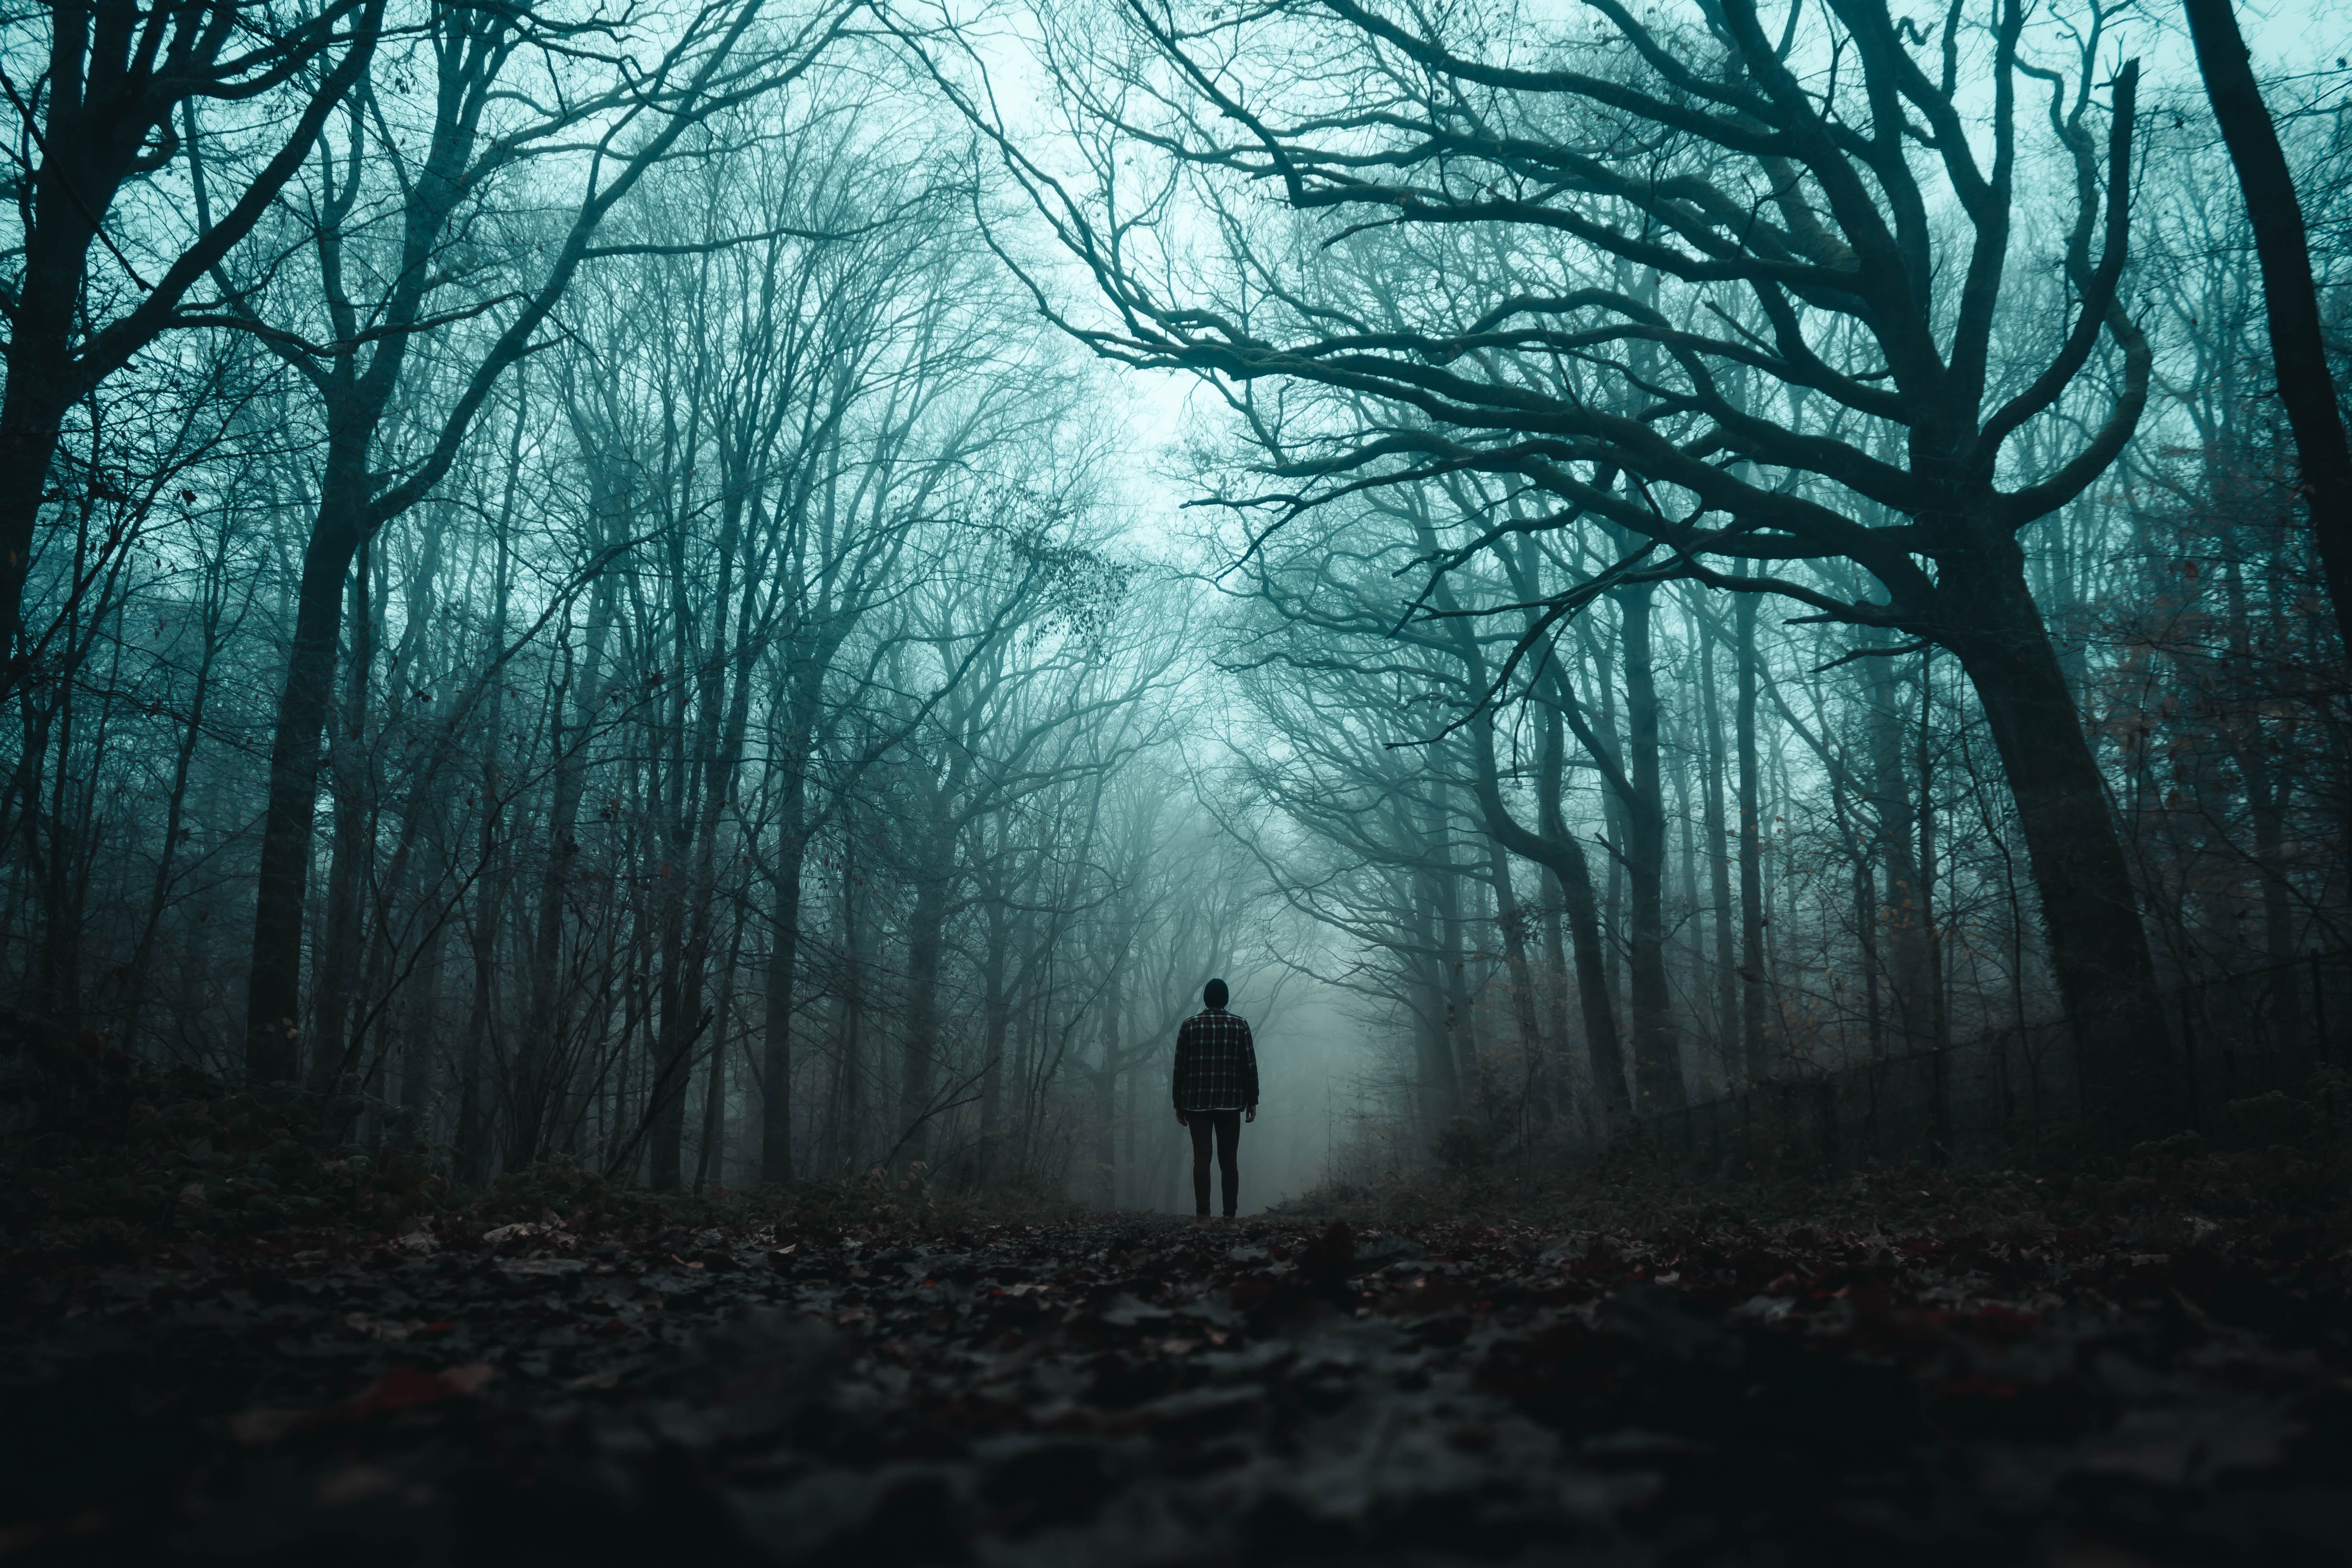 loneliness, silhouette, miscellanea, miscellaneous, forest, fog, gloomy High Definition image